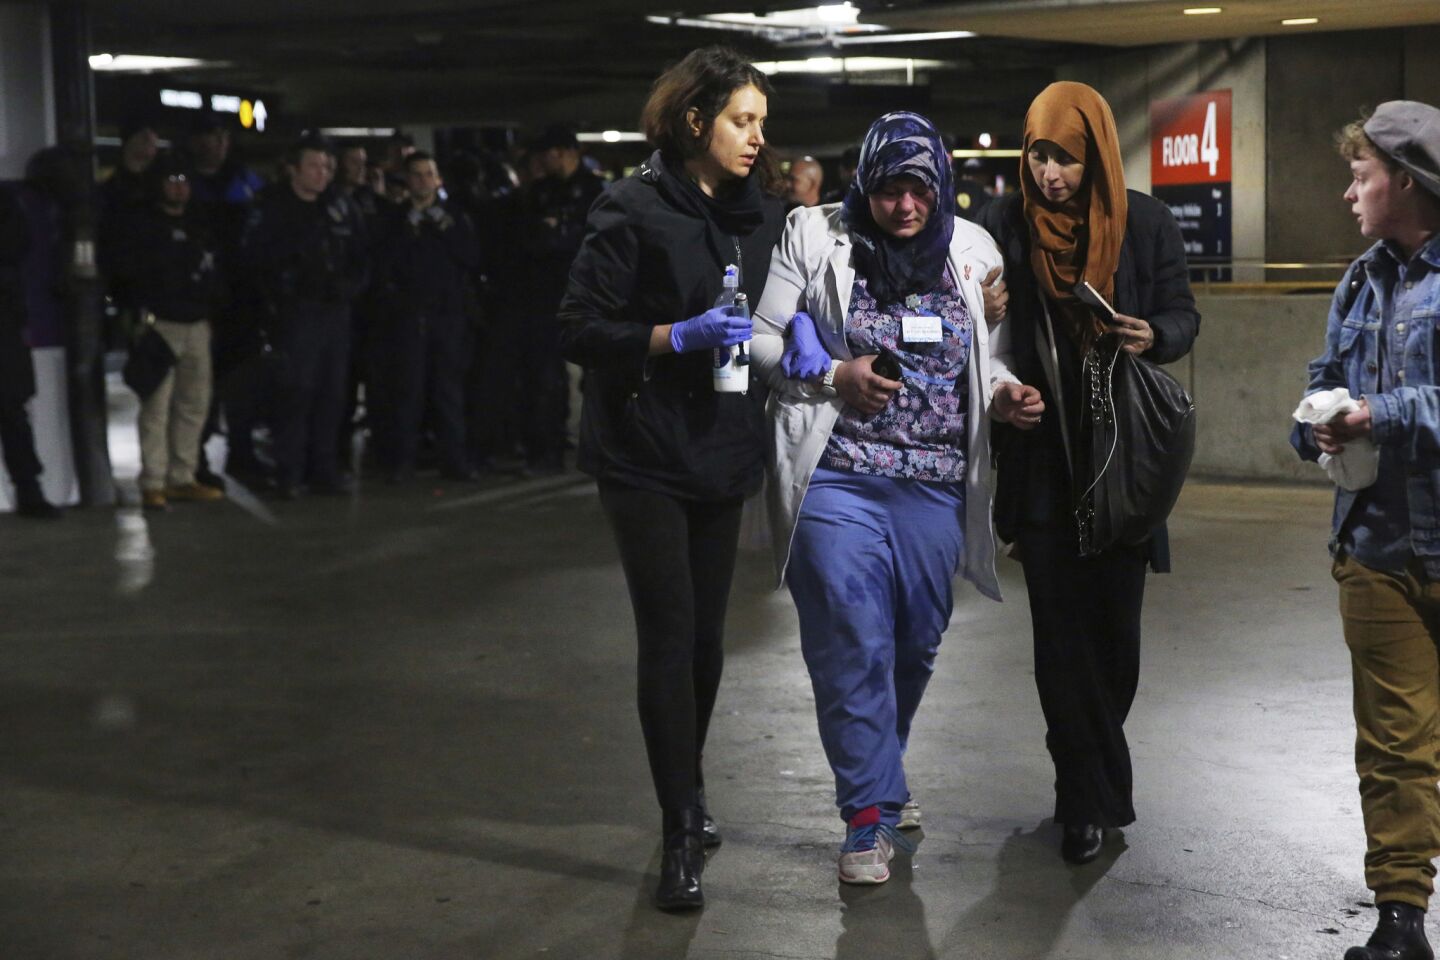 Saffiya Hrahsheh, center, is helped away from police by Liz Bates, left, and others after being pepper sprayed by officers breaking up protests early Sunday at Seattle-Tacoma International Airport.